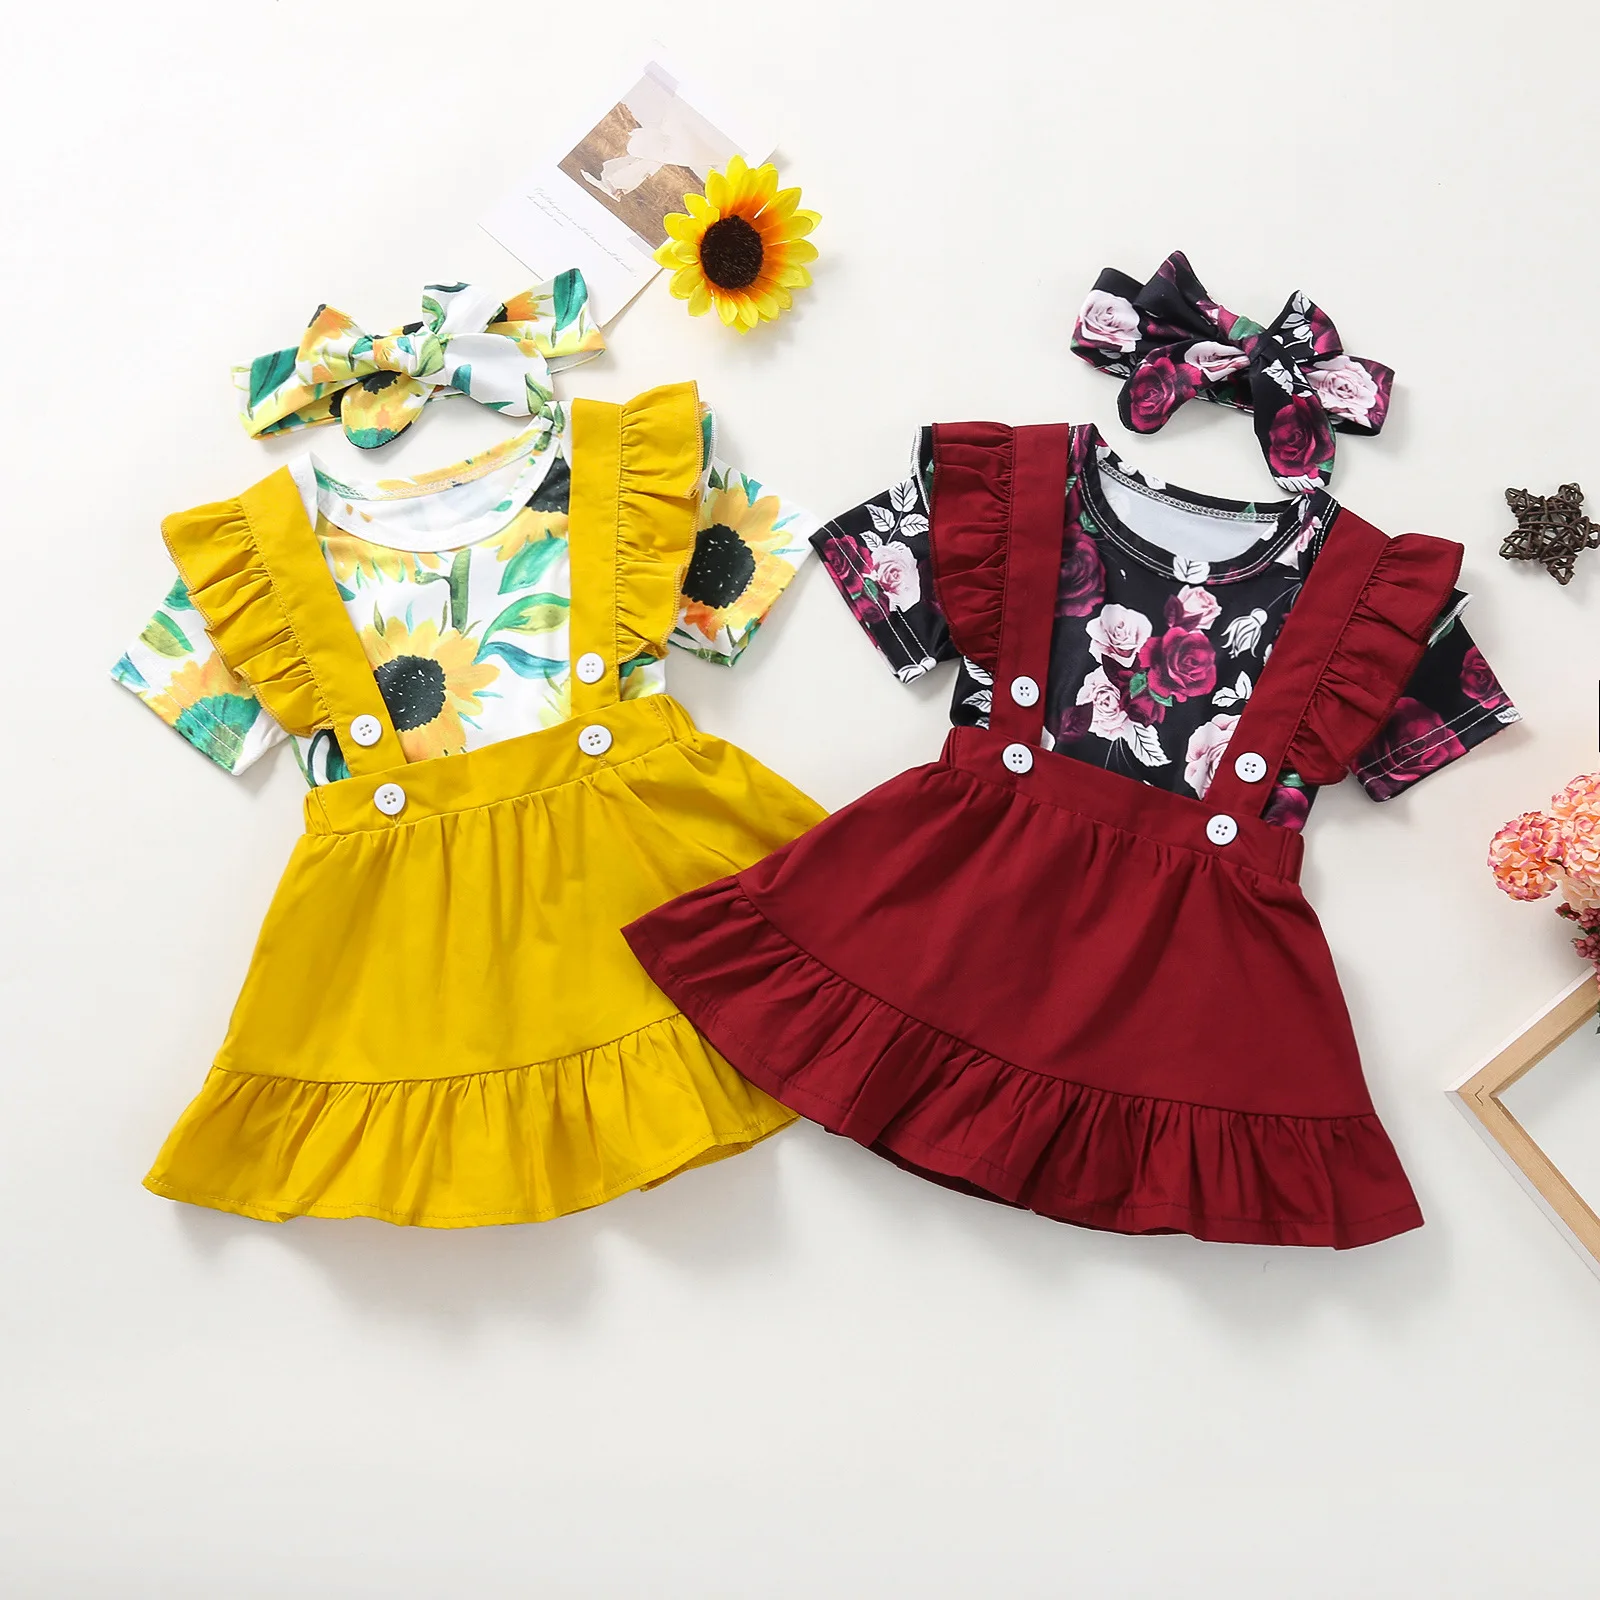 

Summer Newborn Infant Girl Baby Rompers 3Pcs Sunflowers Rompers Adjustable Suspender Baby Girls Clothes, Pic show